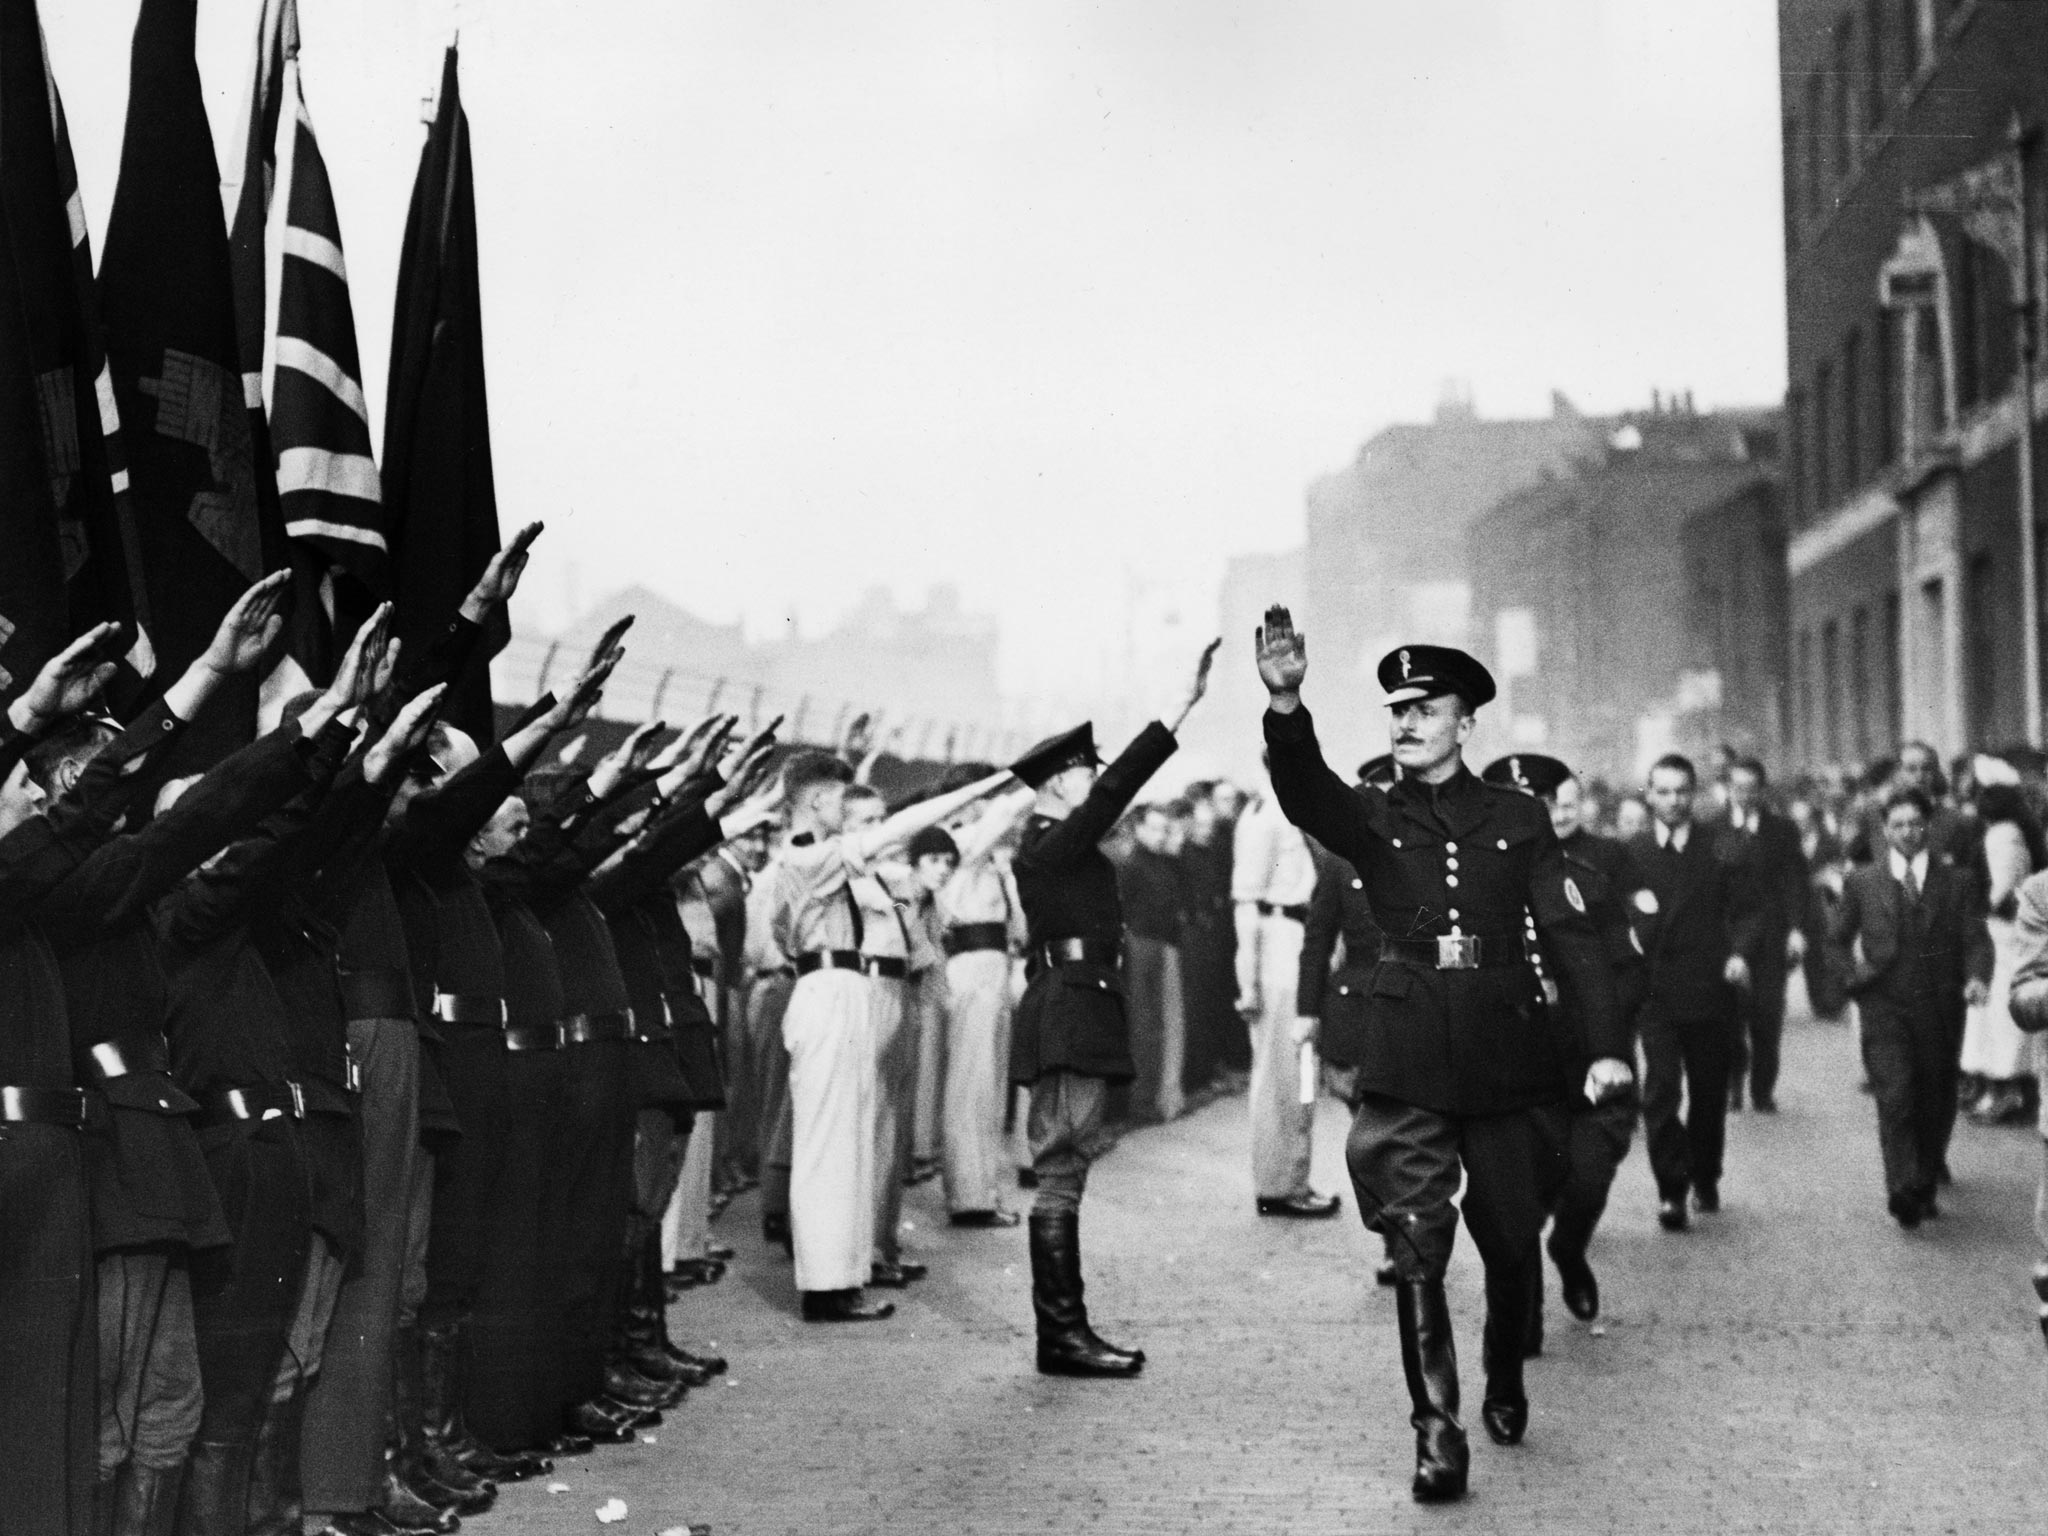 Sir Oswald Mosley, leader of the British Union of Fascists, in the 1930s